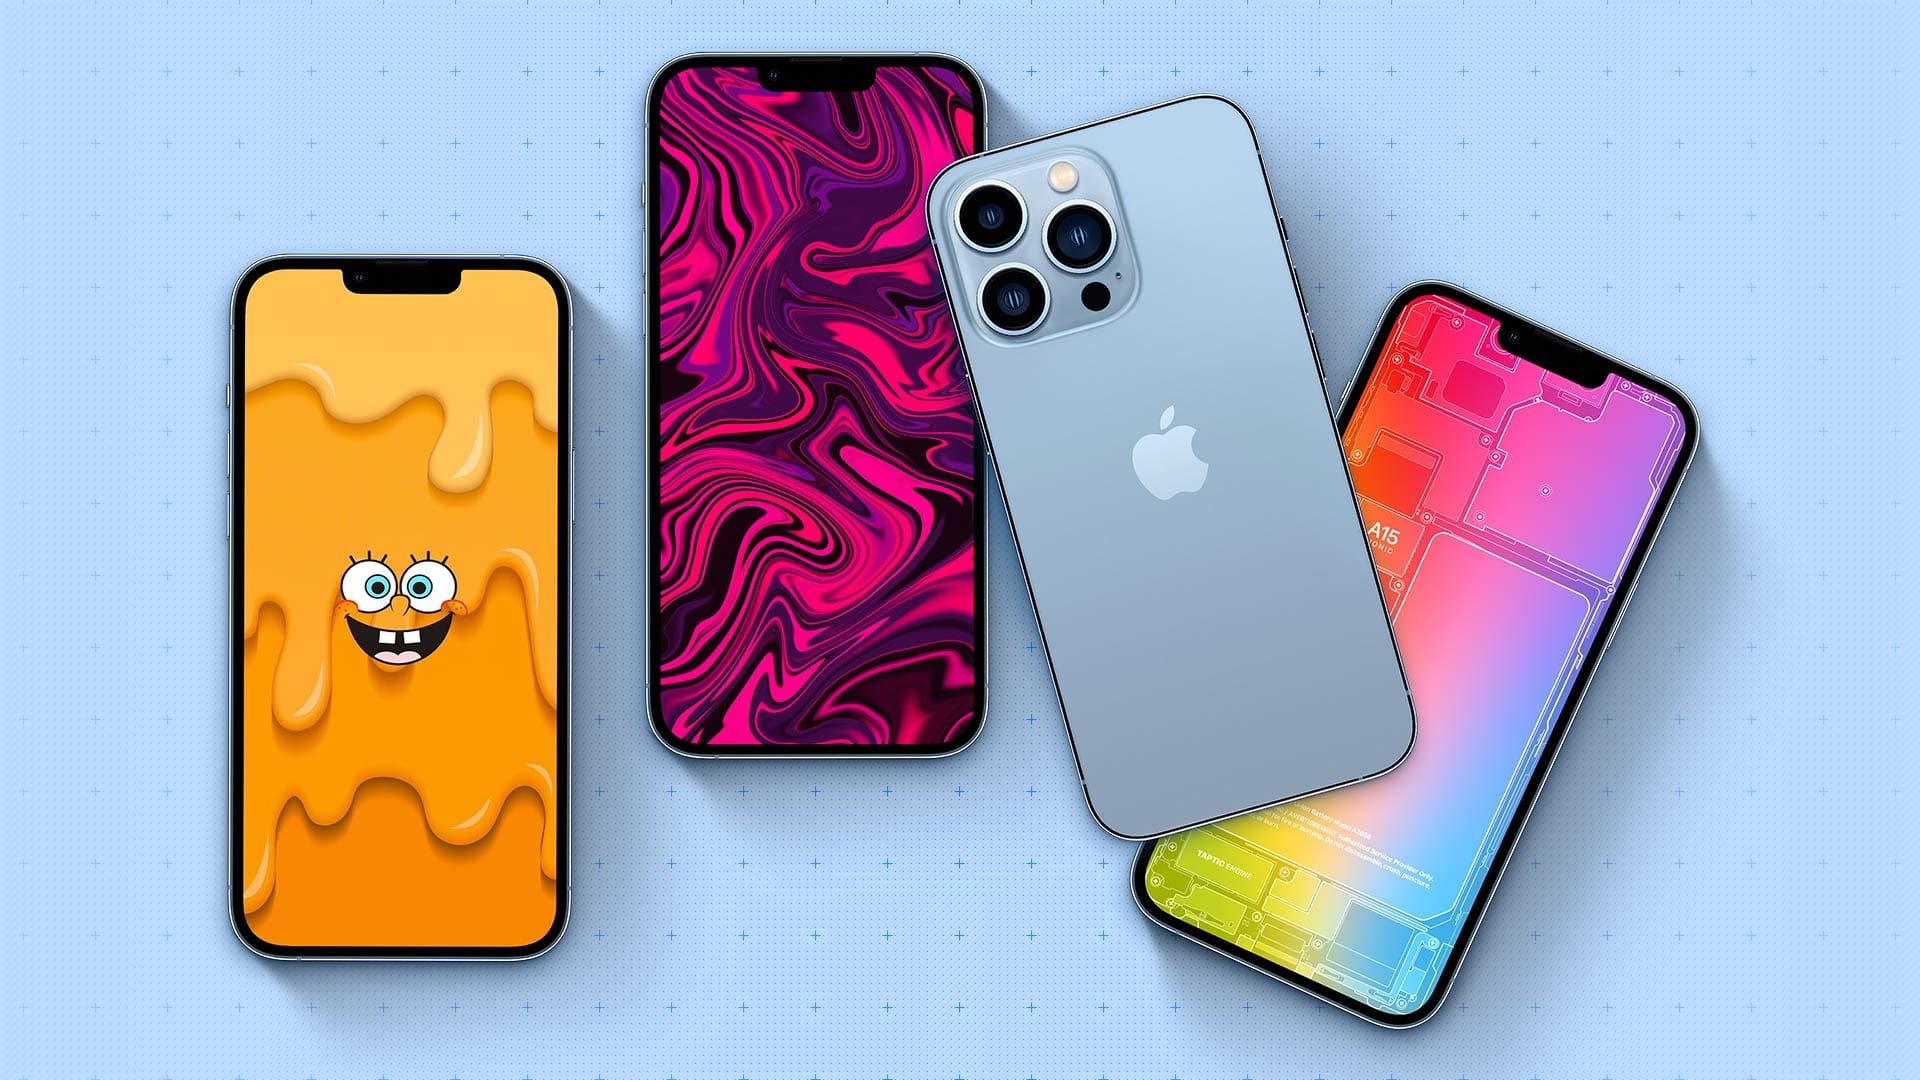 The best iPhone wallpapers for 2022 | CellularNews